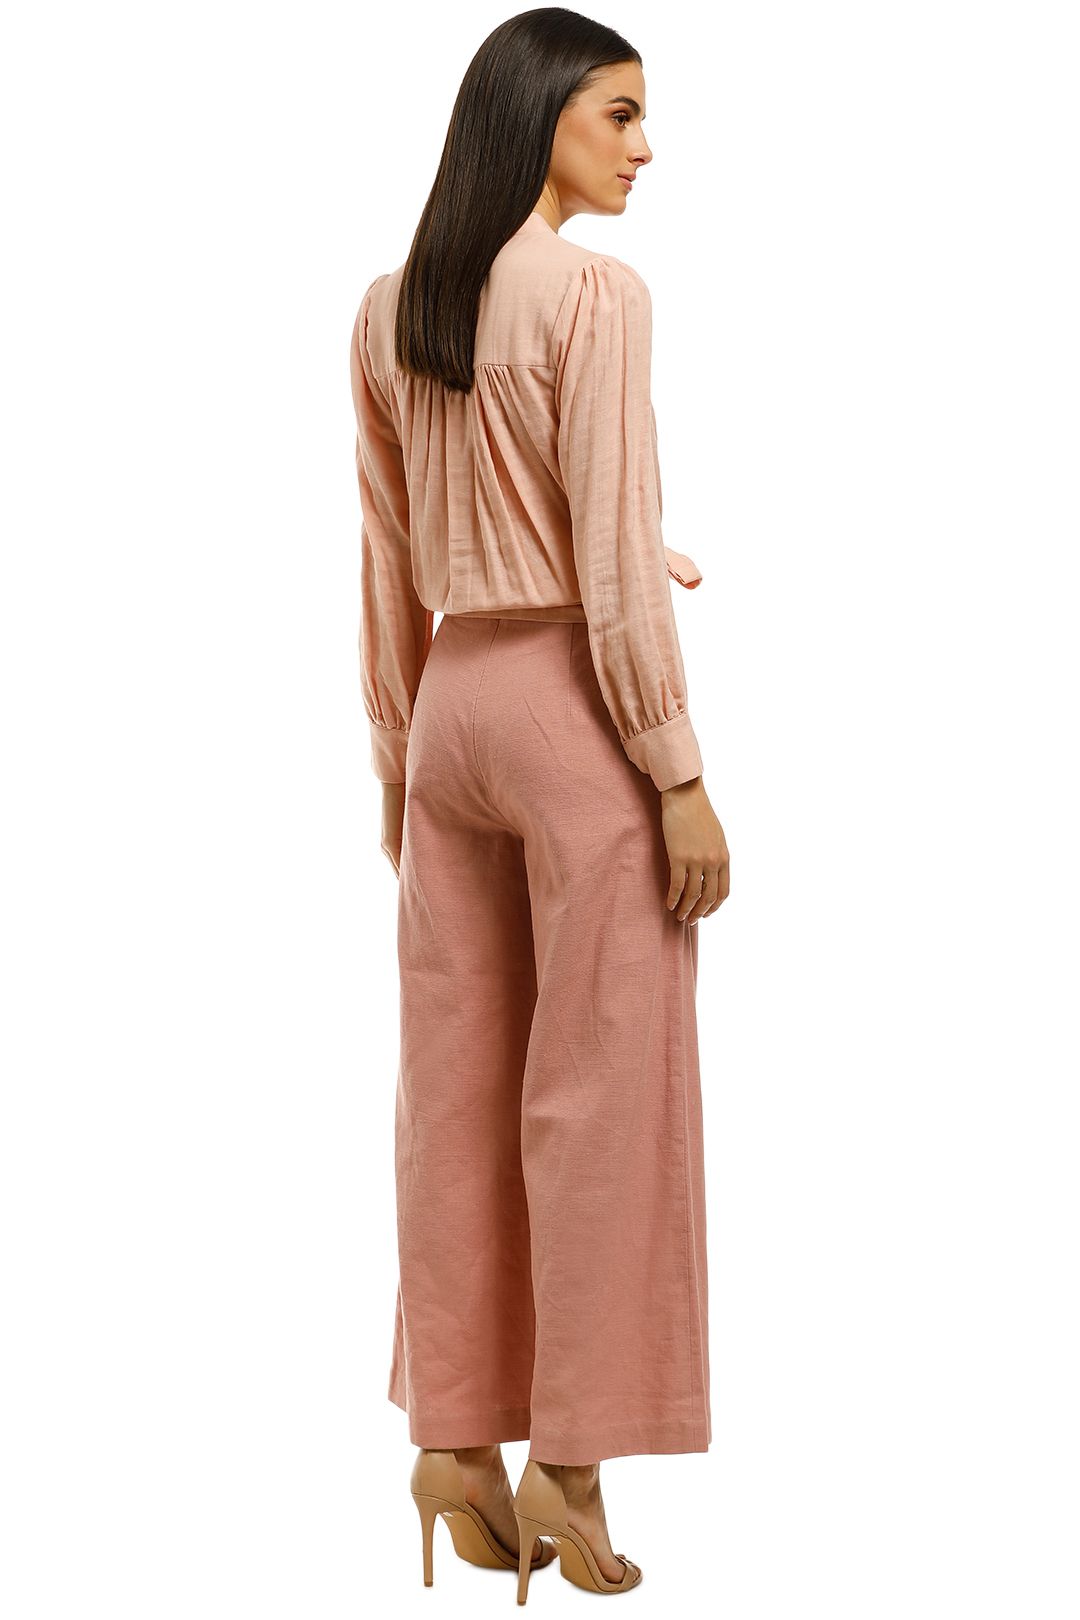 Ministry-Of-Style-Haven-Blouse-Pink-Back